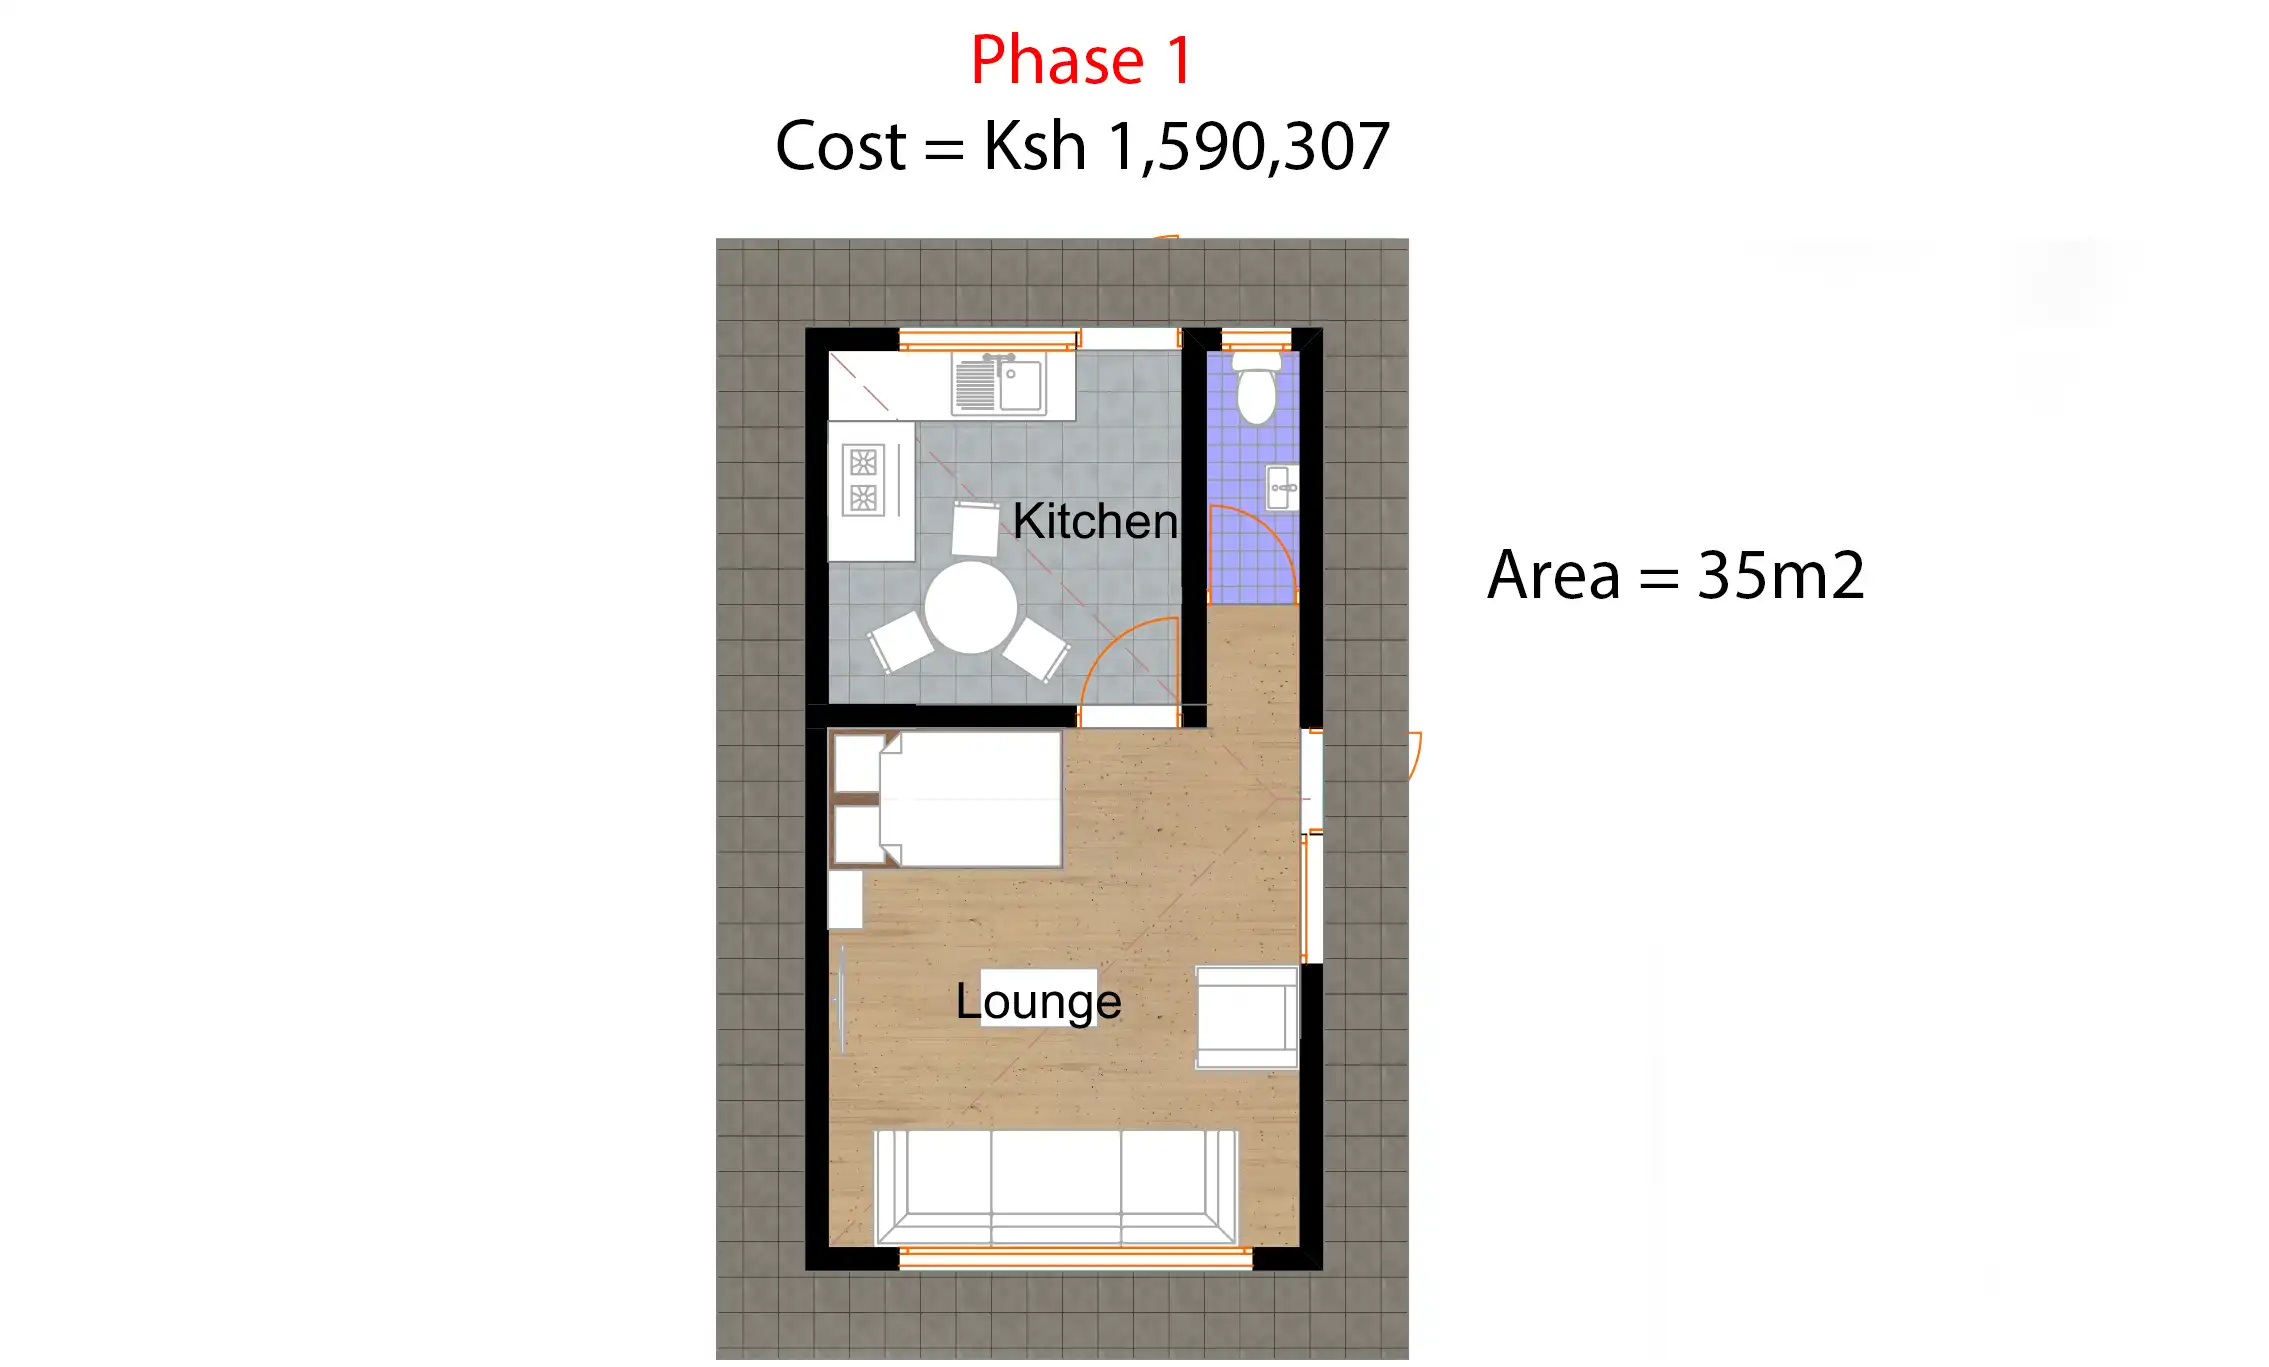 3 Bedroom Bungalow - ID 31101 - phase1plan.png from Inuua Tujenge house plans with 3 bedrooms and 2 bathrooms. ( jengapolepole )